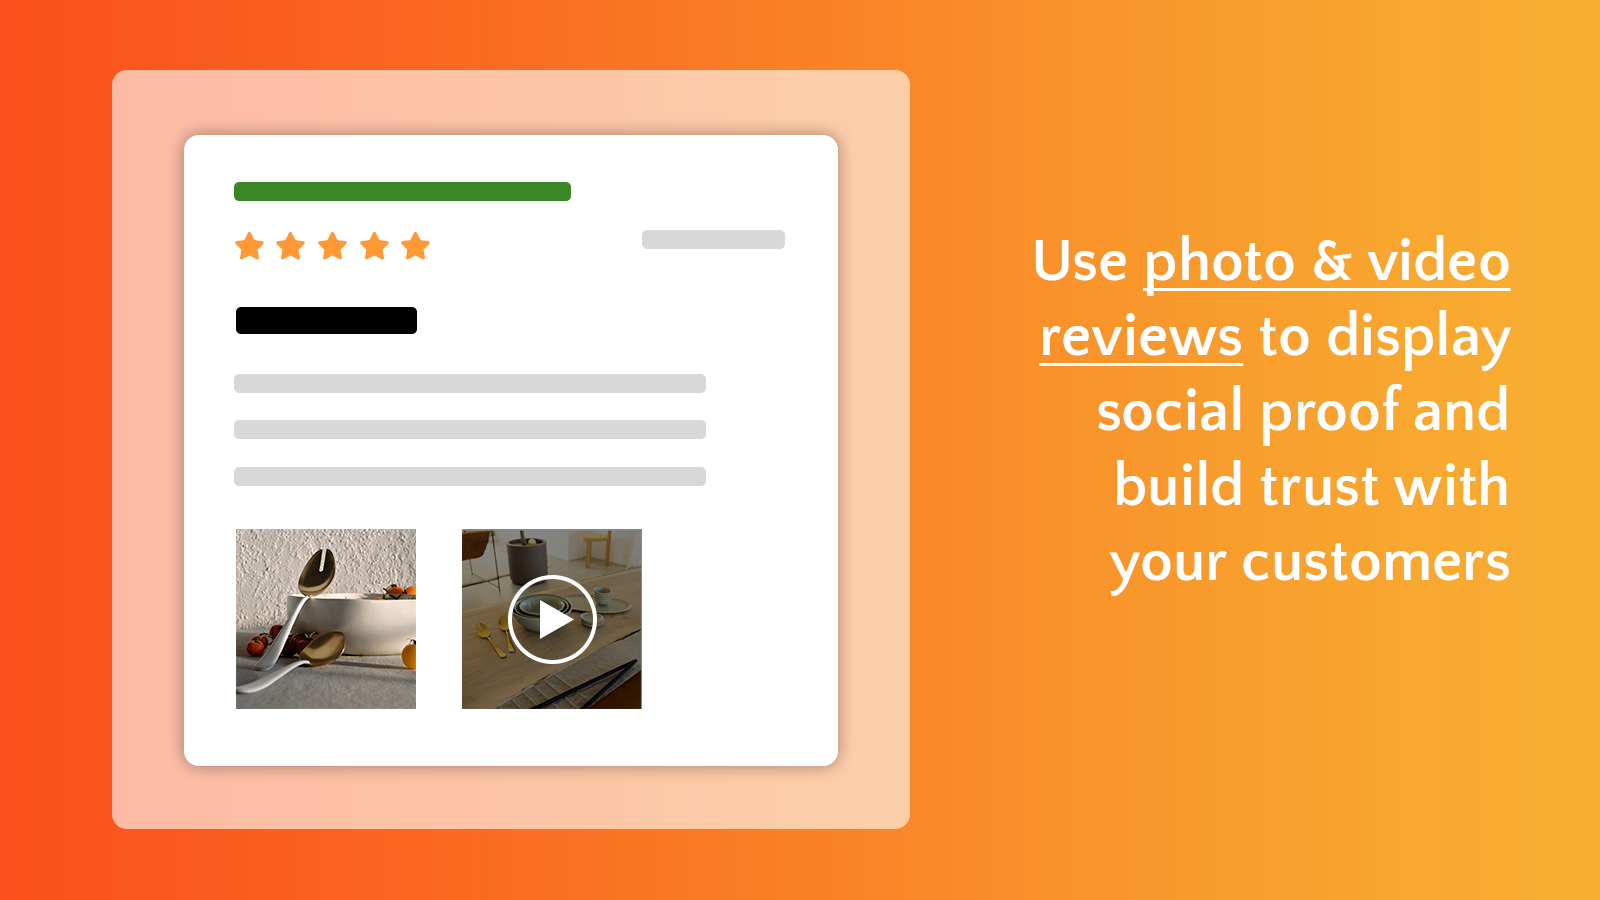 Allowing to upload photos and videos for product review